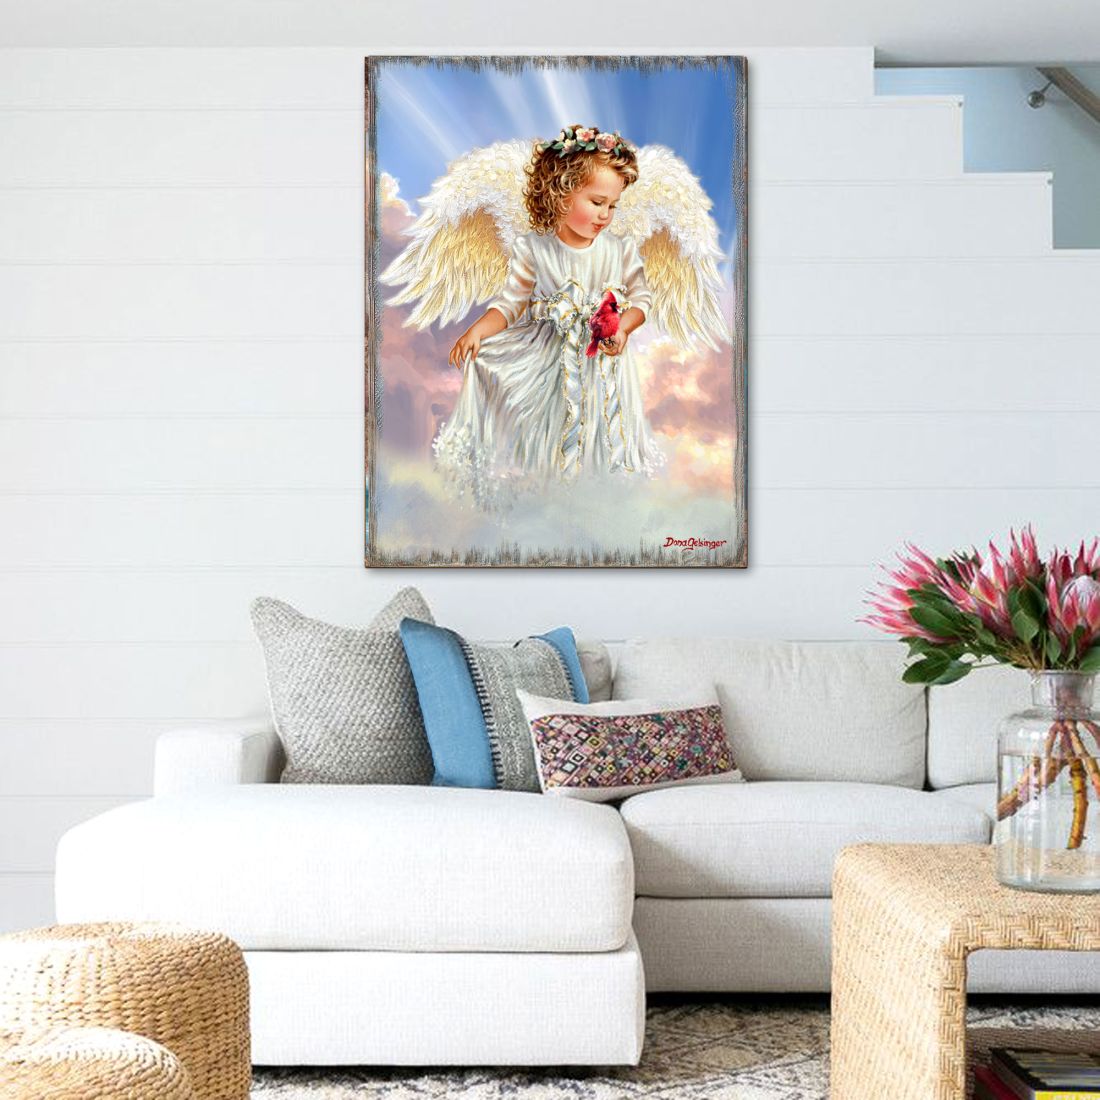 95676B-DG-08 7.5 x 5.5 x 0.75 in. Angel with Cardinal Wooden Wall Art - Petite Size -  Designocracy